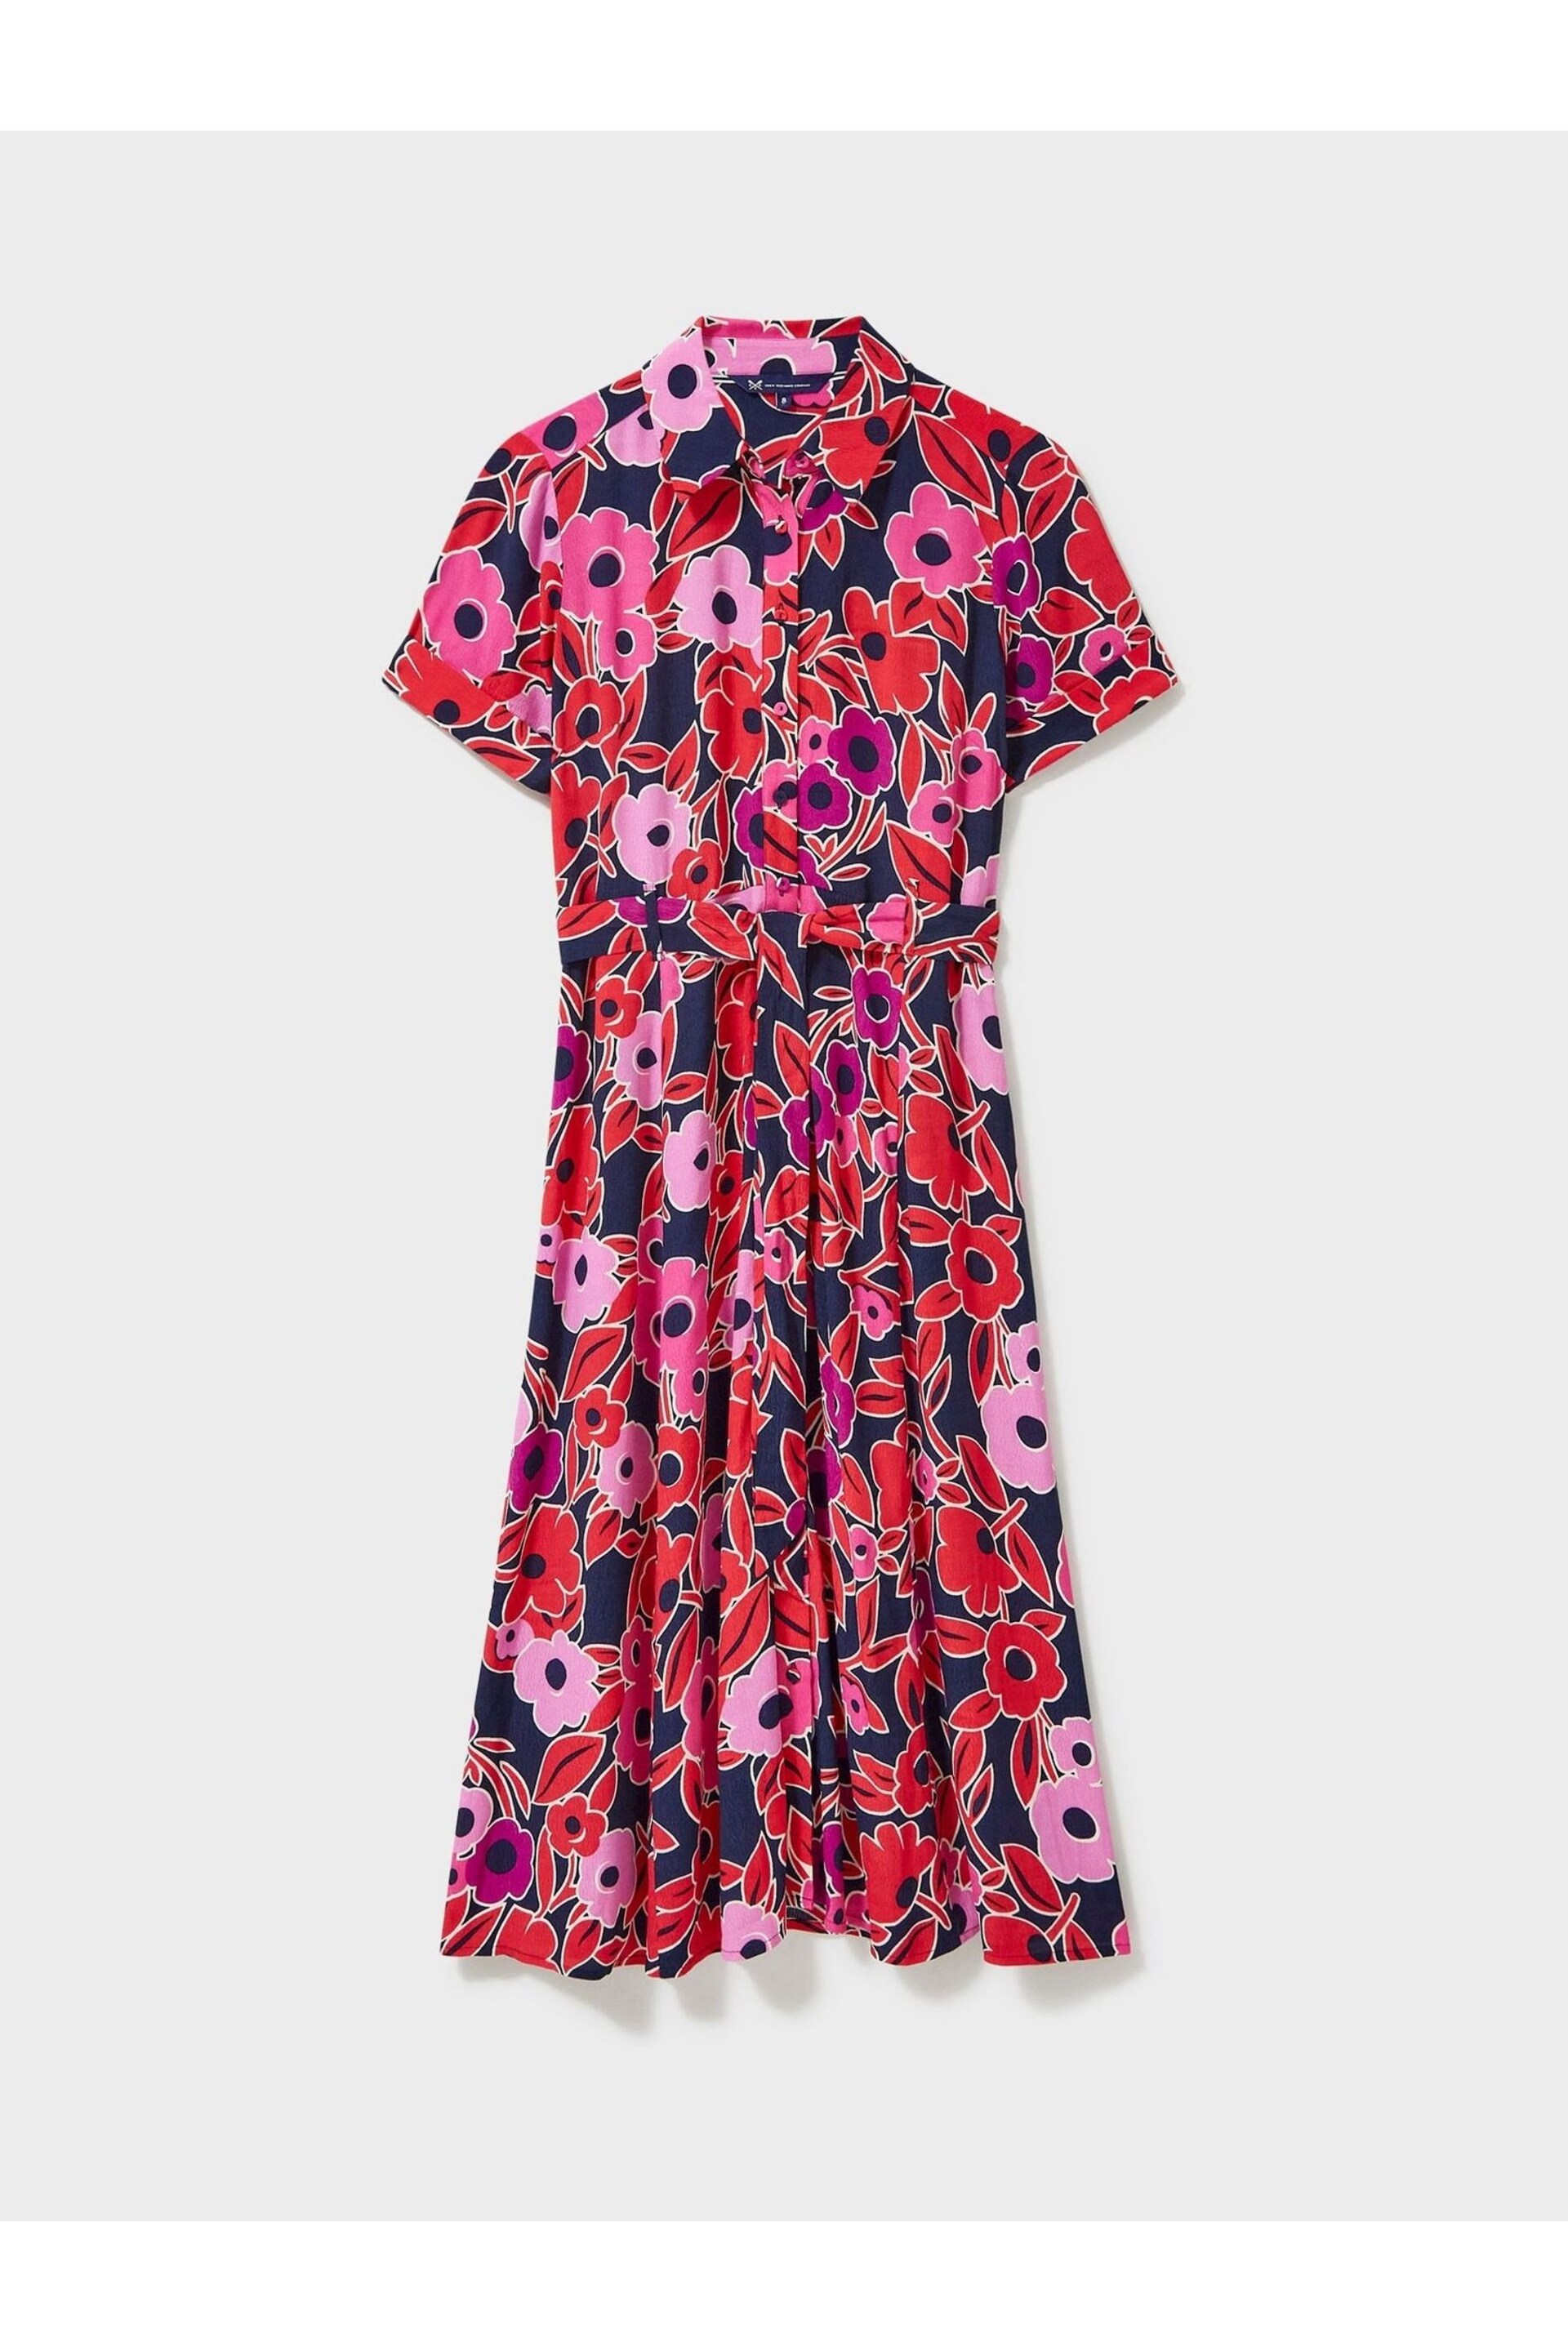 Crew Clothing Sienna Short Sleeve Floral Shirt Dress - Image 5 of 5